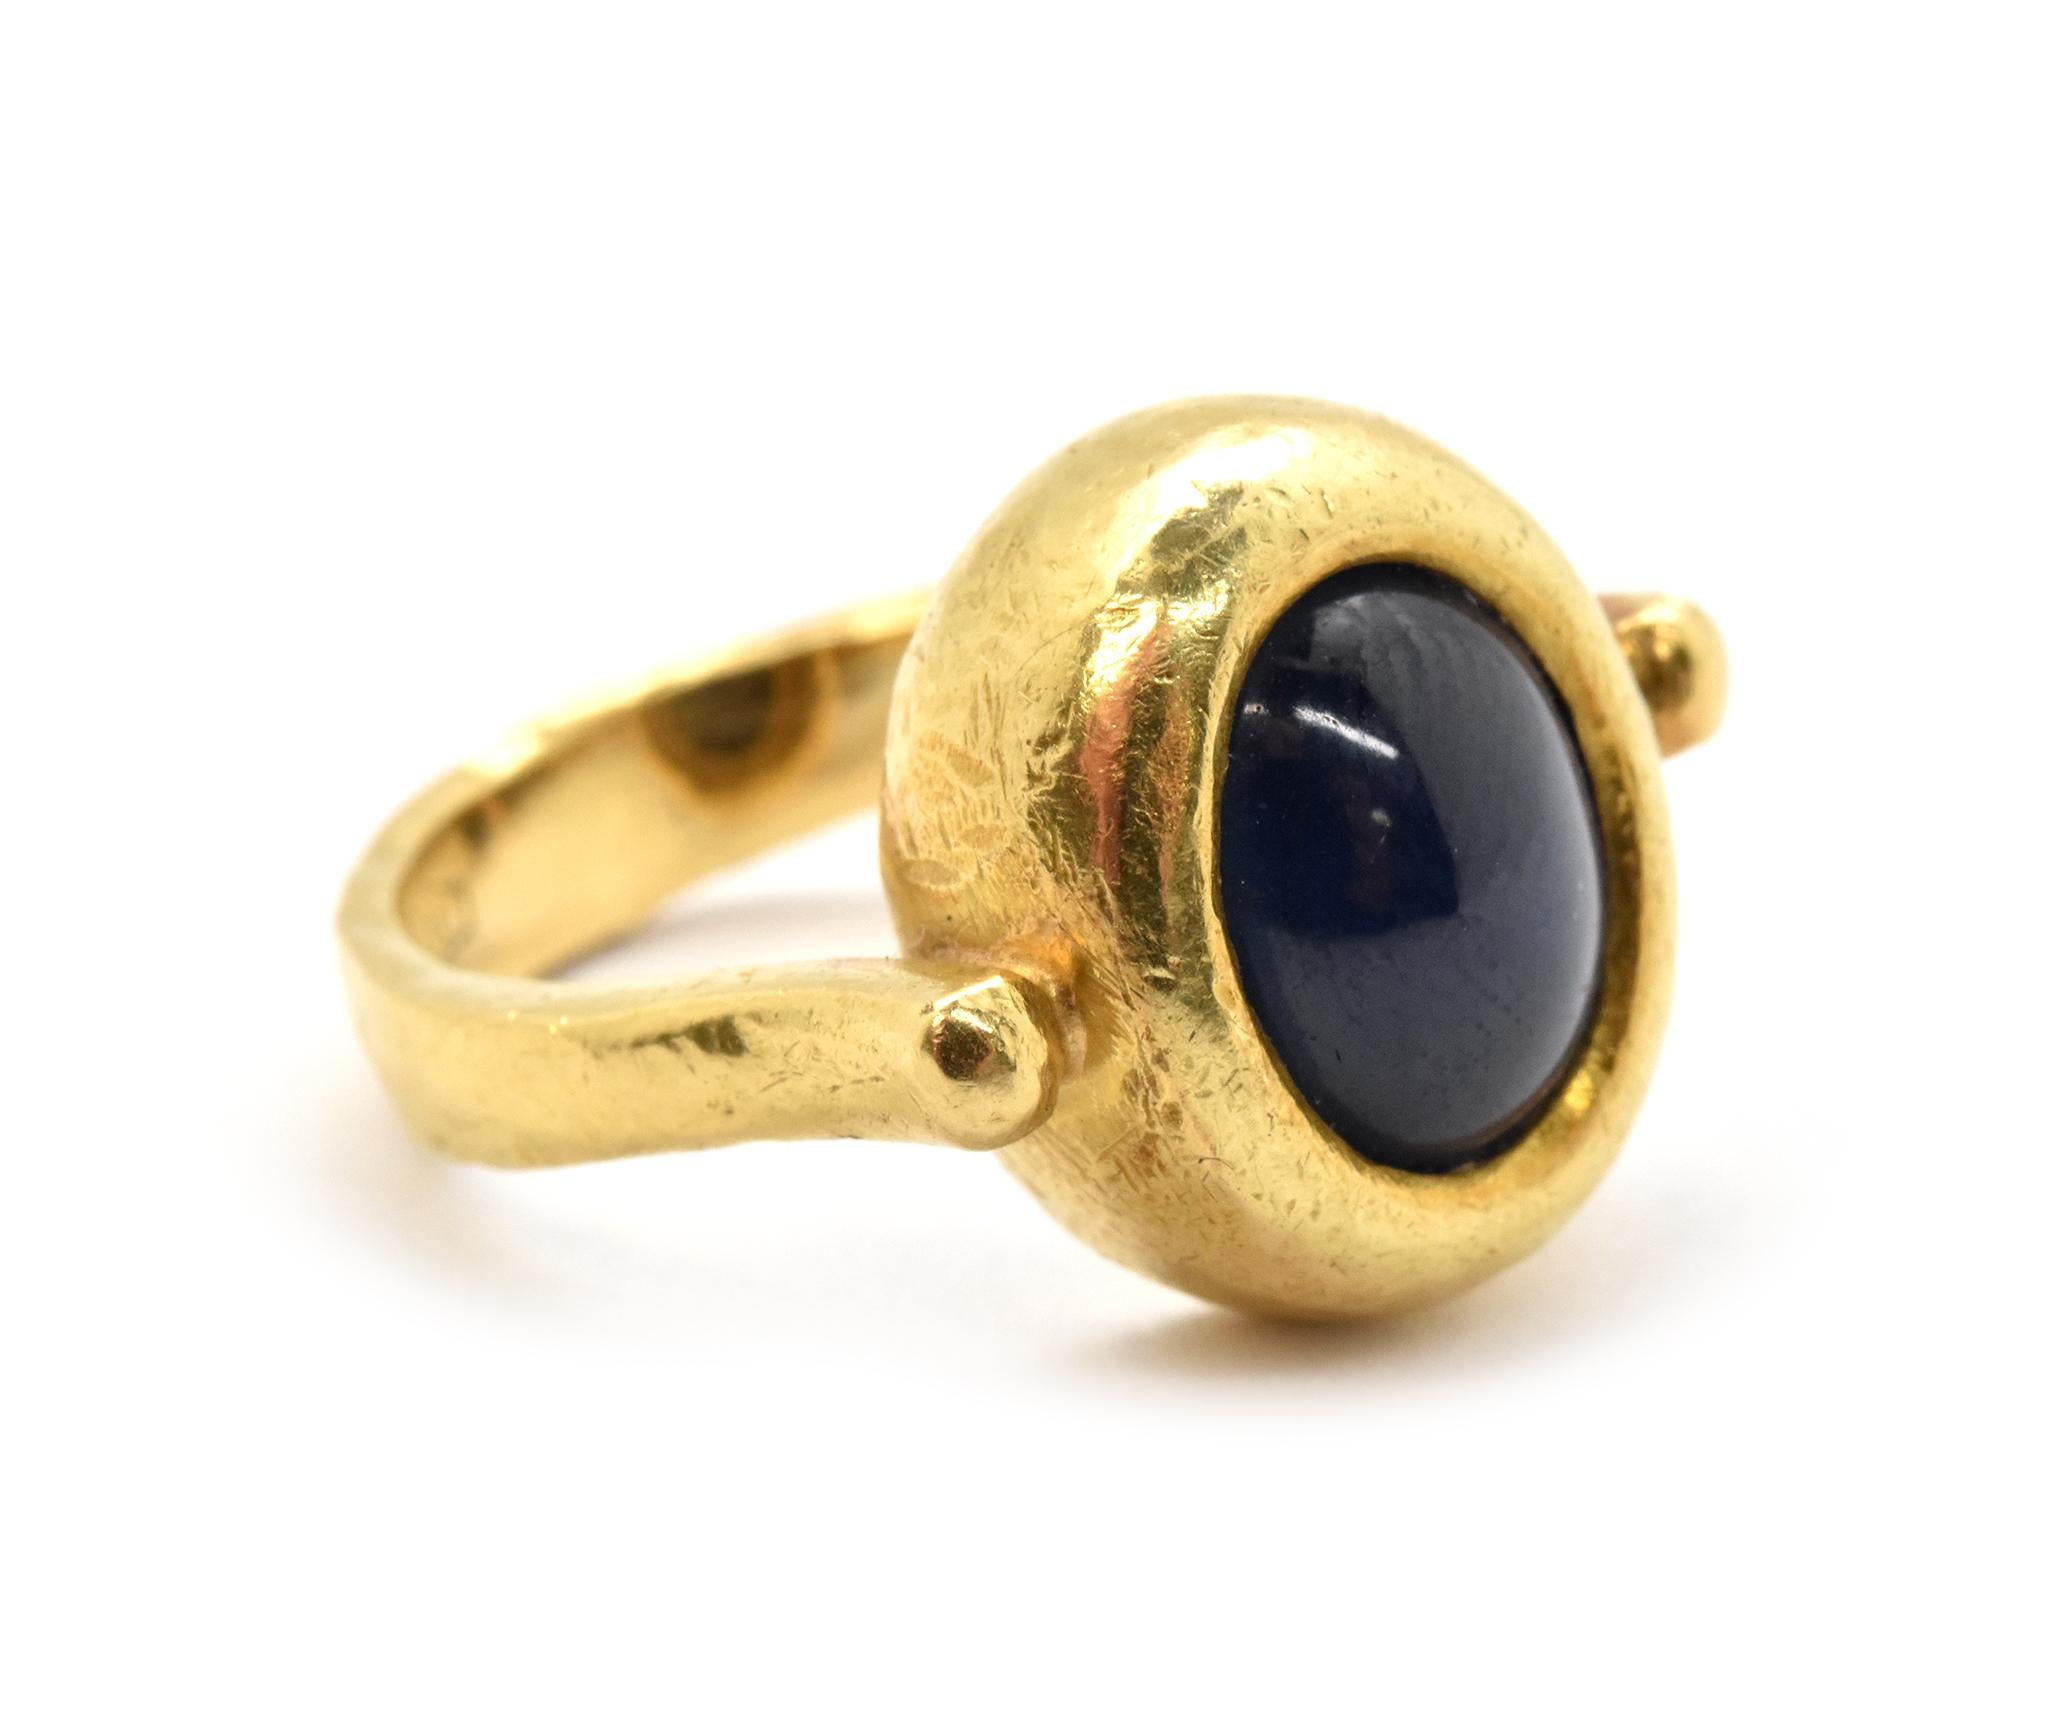 This ring is made in solid 18k yellow gold and it features a cabochon blue sapphire at its center. The semi-opaque deep blue sapphire is bezel set in a chunky bezel with a lightly hammered texture. The shank of the ring is narrow and attaches at the